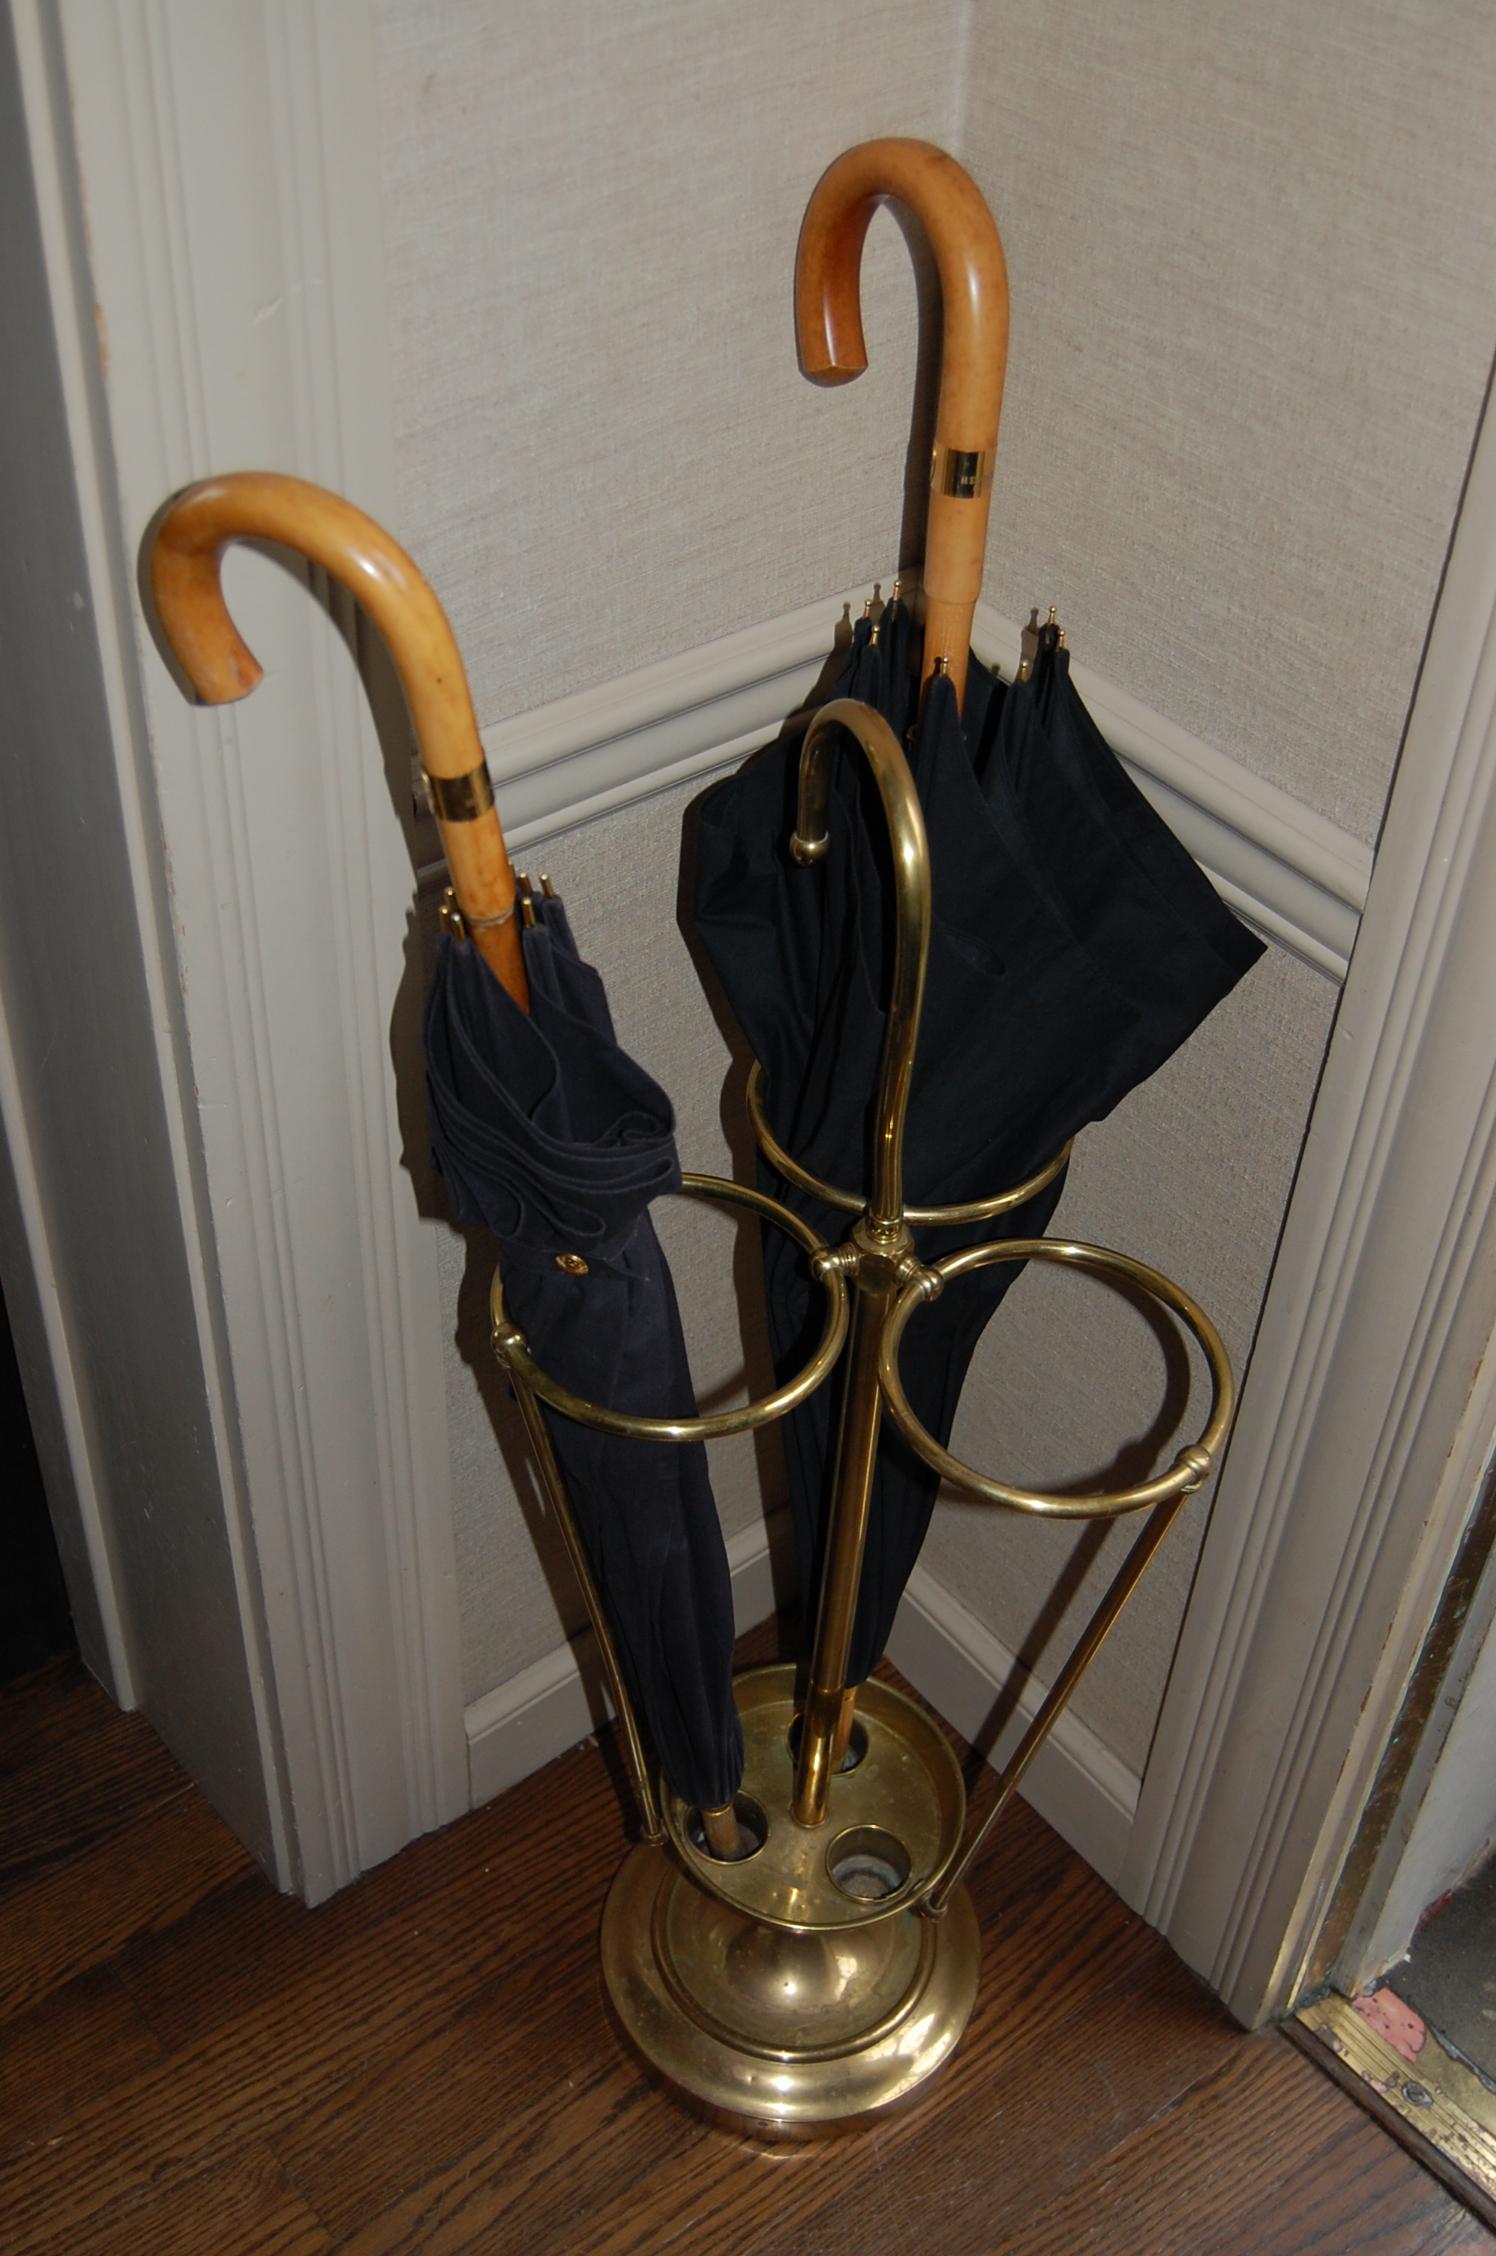 Mid-20th Century Brass Umbrella Stand by Herco Art Manufacturing Company For Sale 9